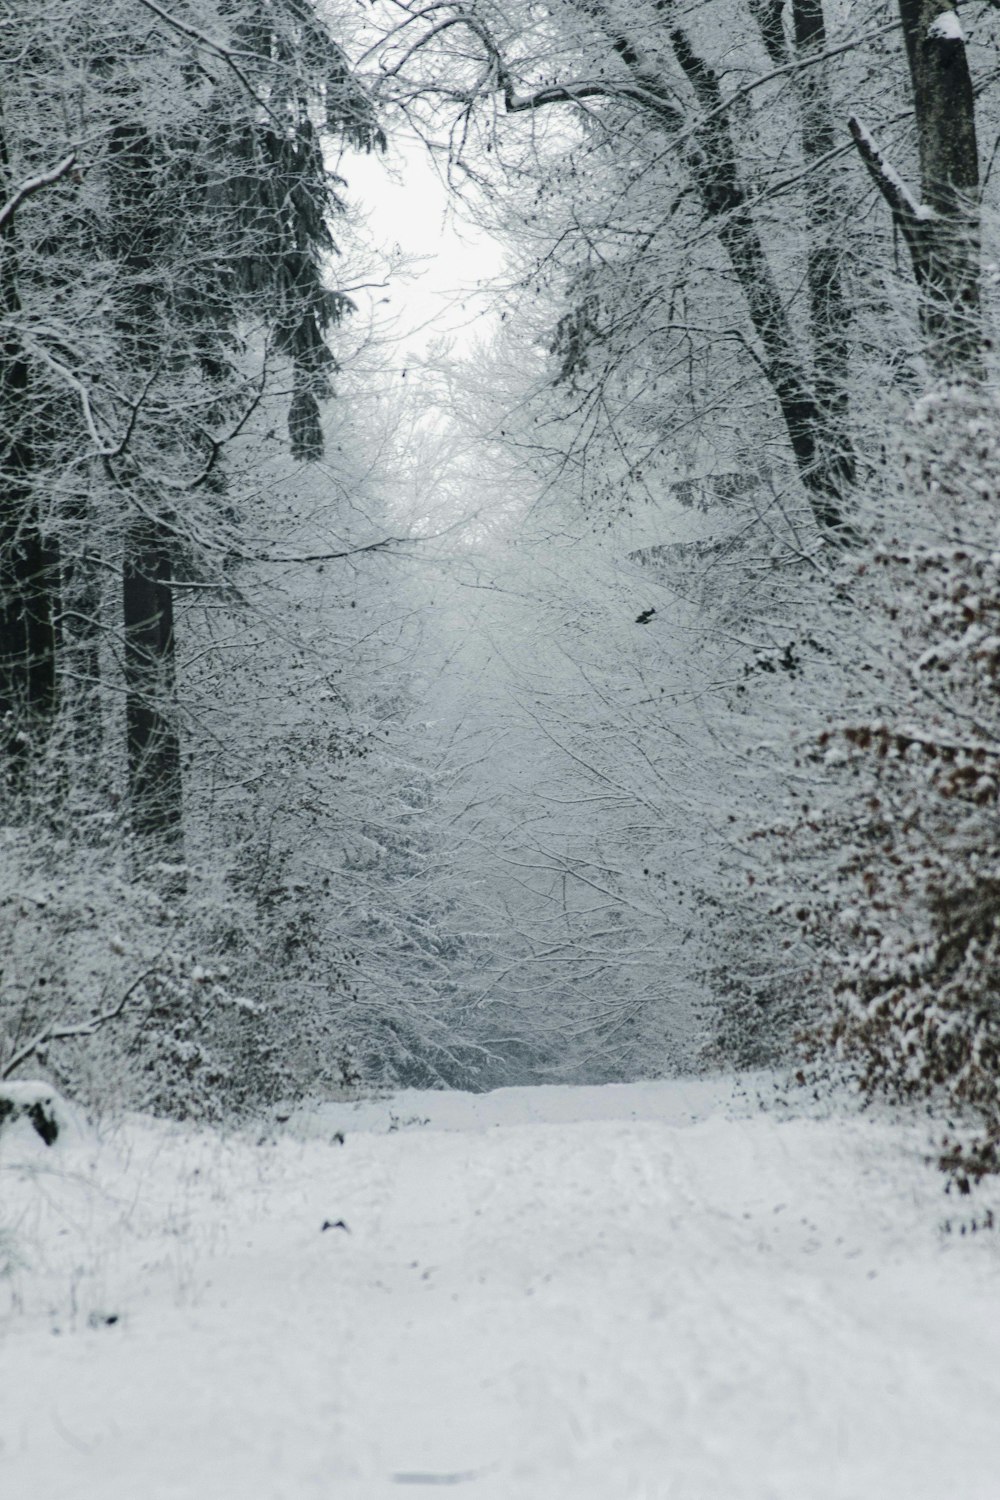 a snow covered path through a forest with lots of trees